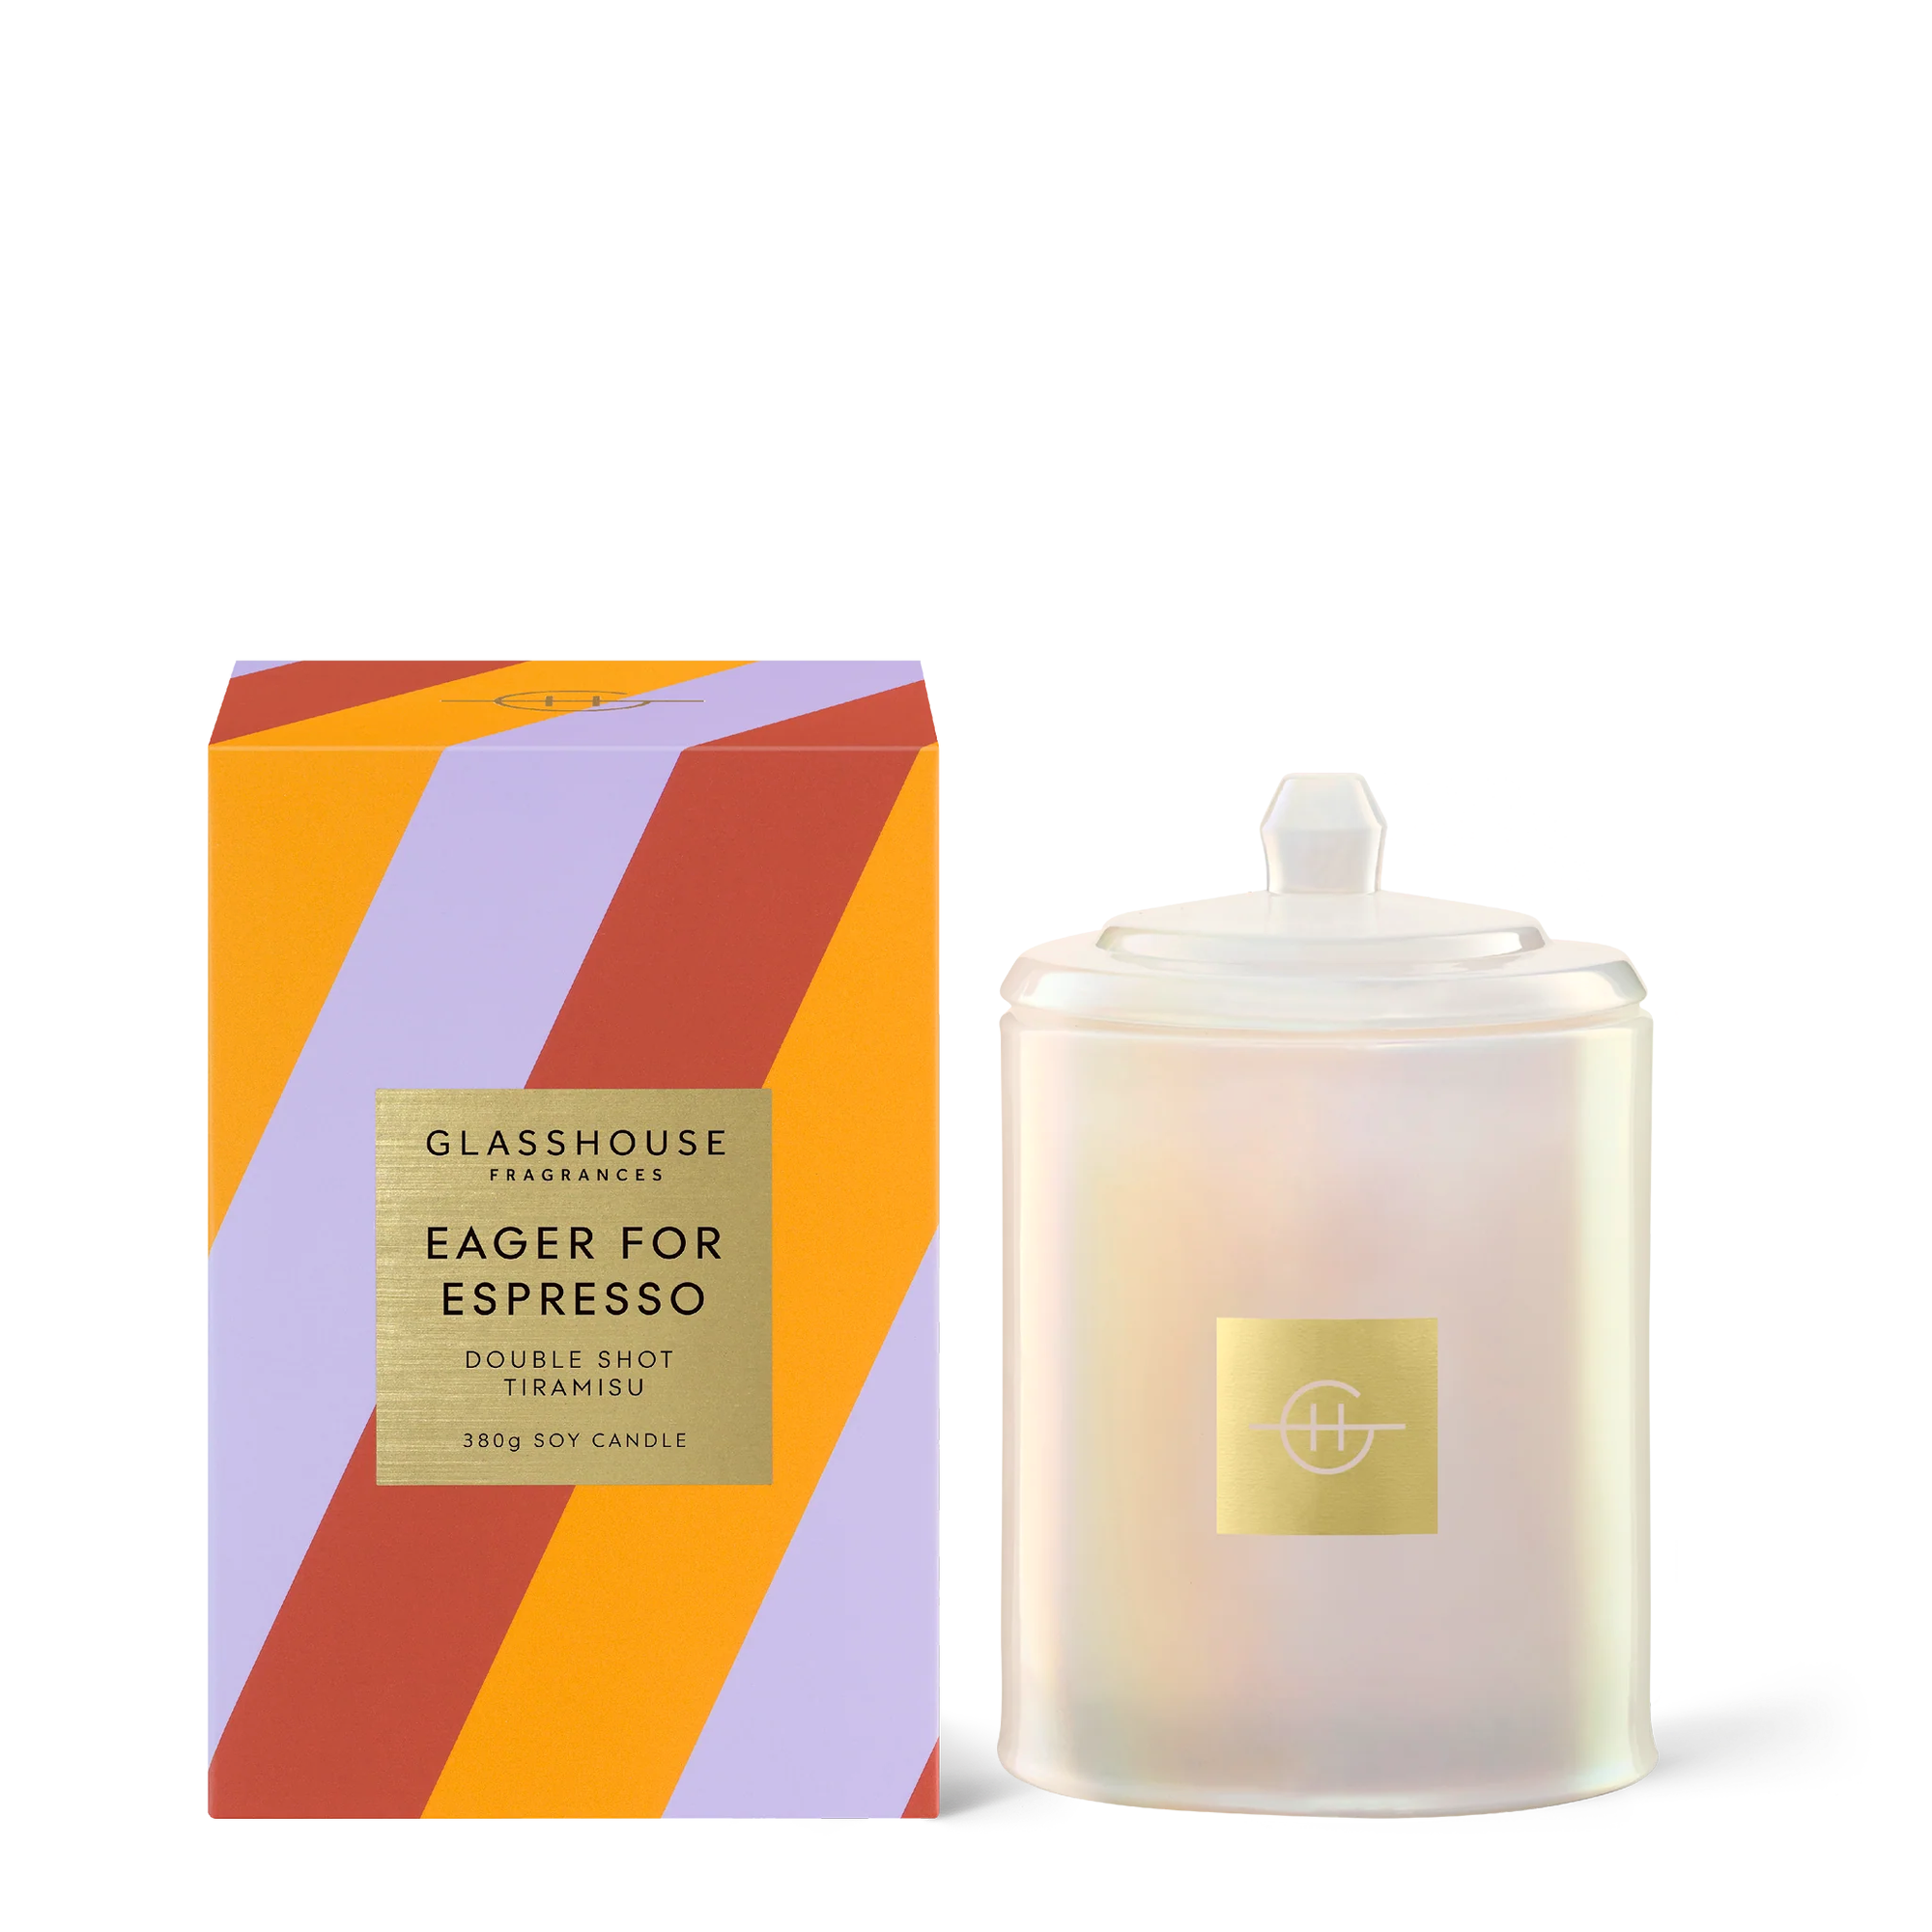 Eager For Espresso 380g Candle - Glasshouse